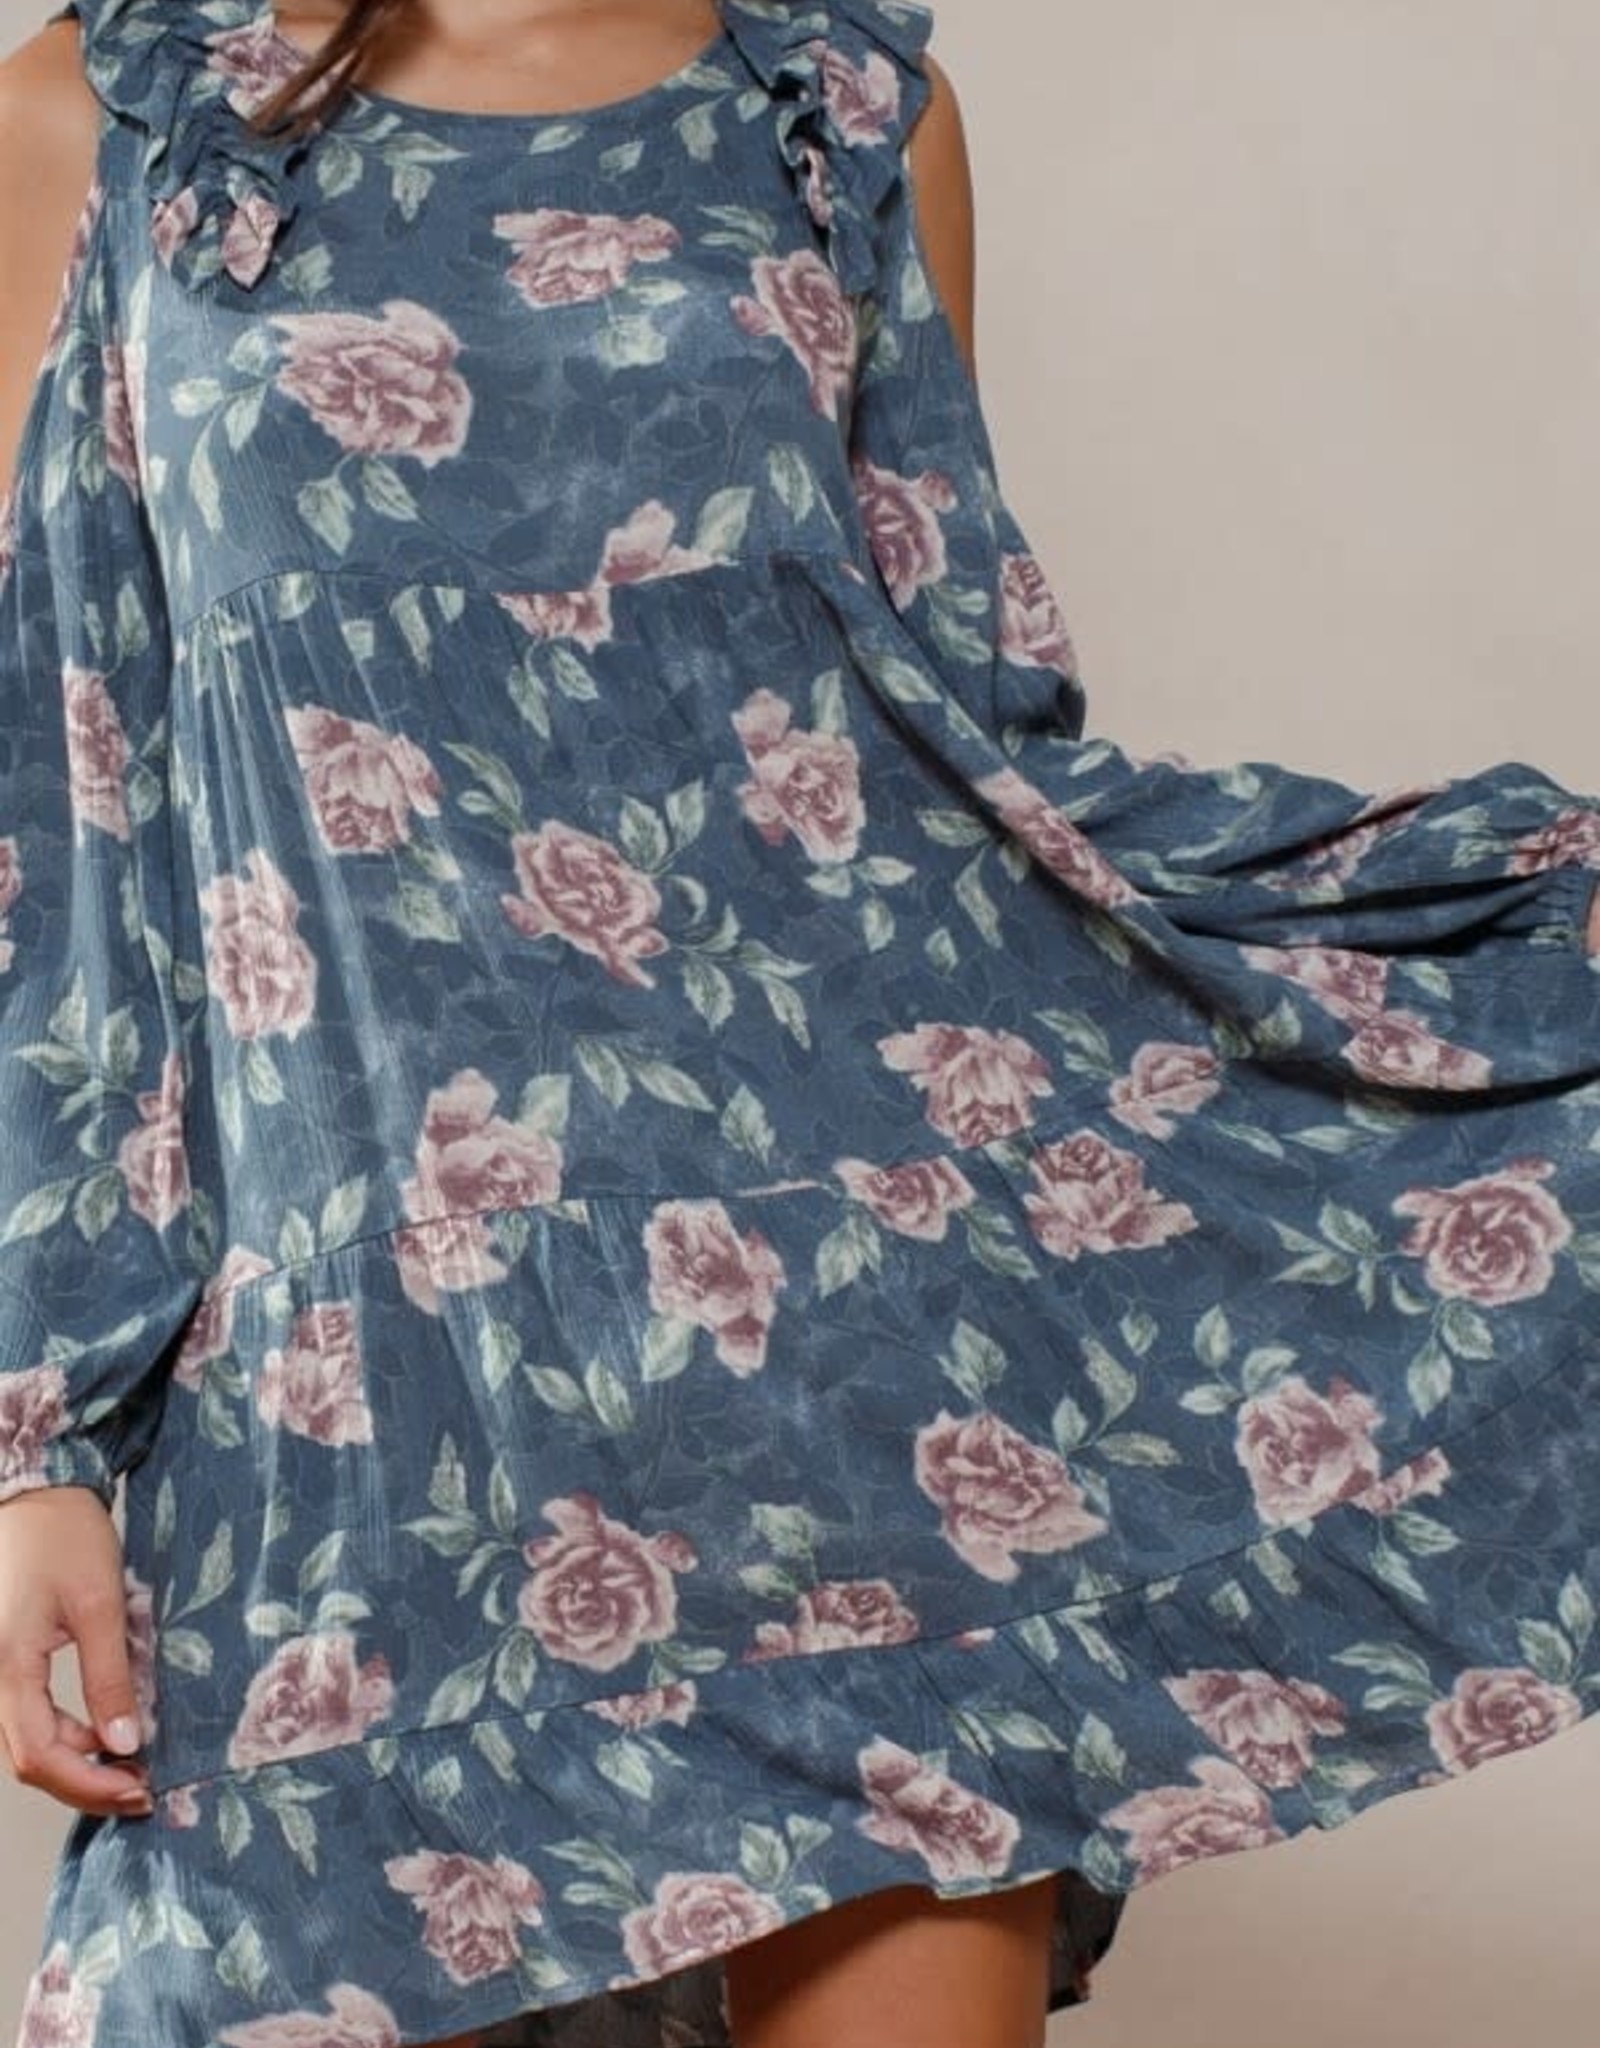 Oddi Floral Printed Babydoll Dress Ruffle Detailed Cold-Shoulder Long Sleeves and a Round Neckline